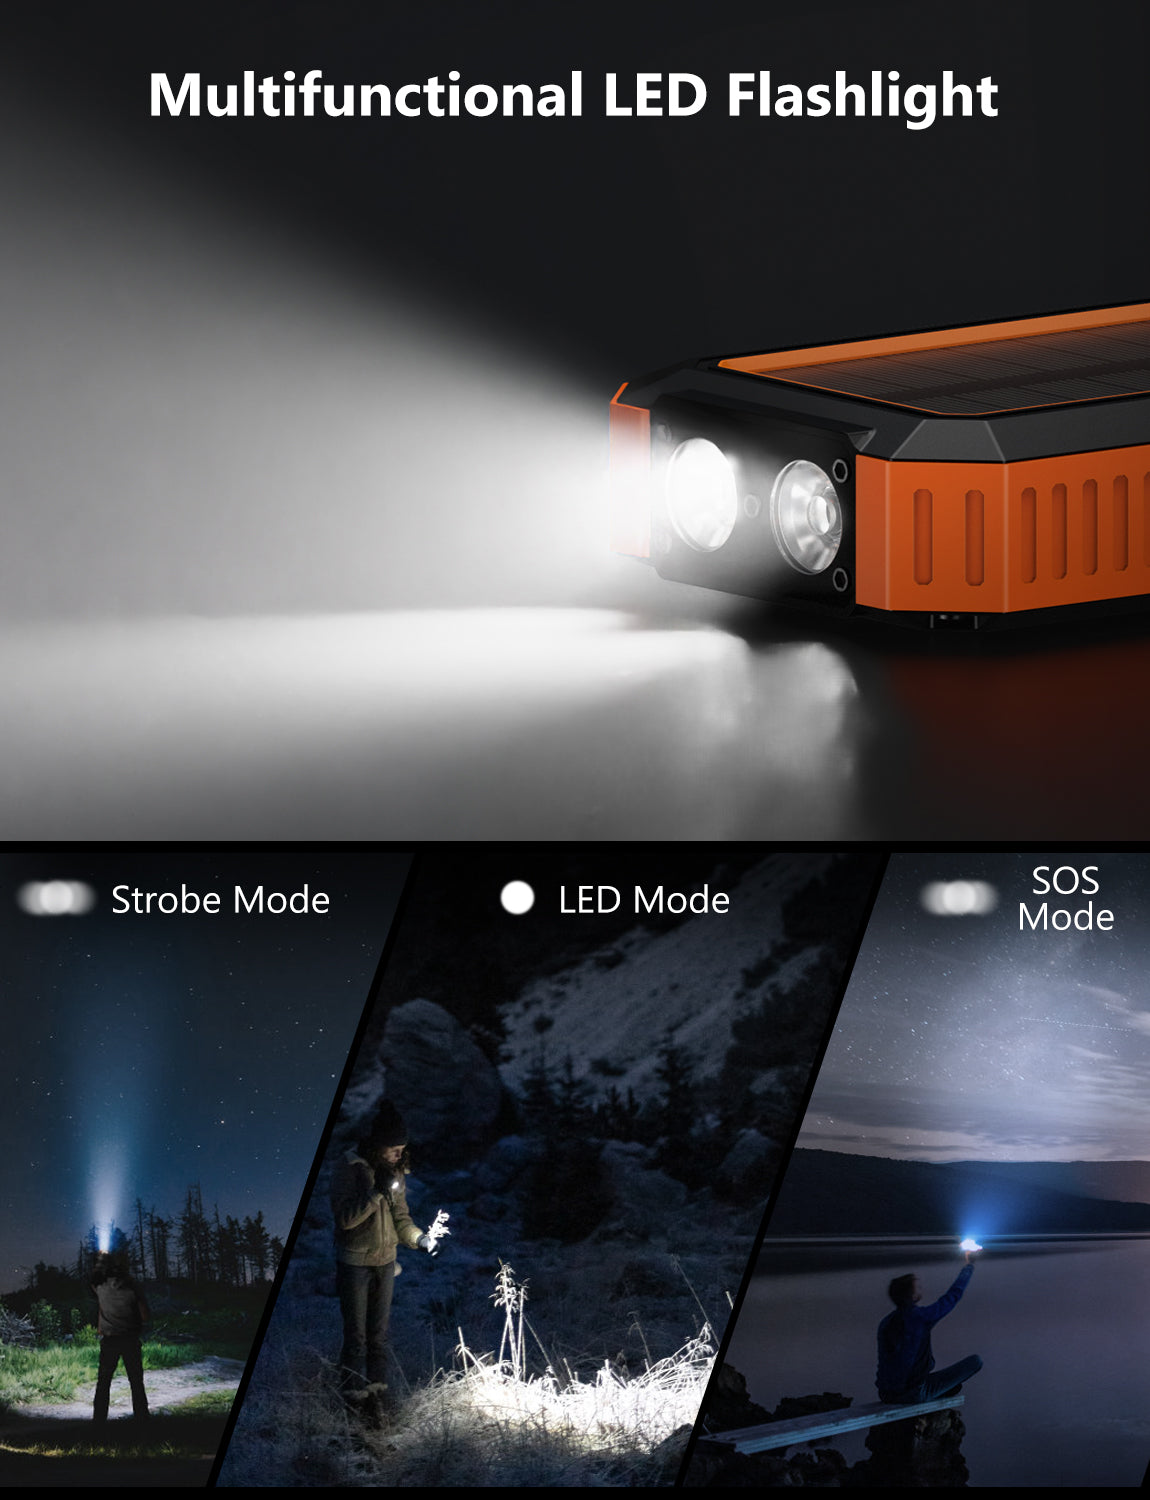 Power bank features multifunctional LED flashlight with Strobe, LED, and SOS modes. 